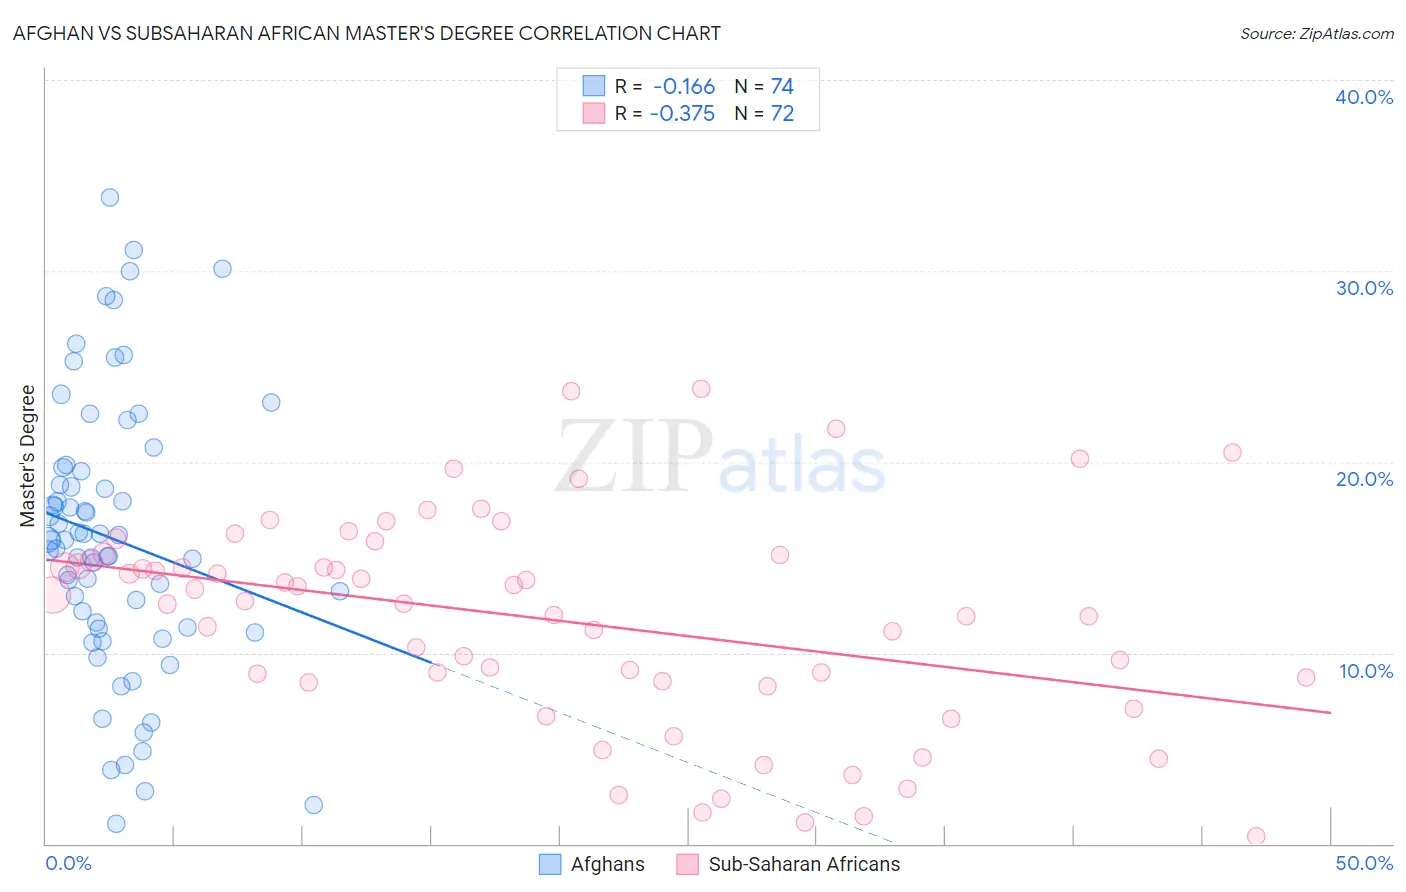 Afghan vs Subsaharan African Master's Degree